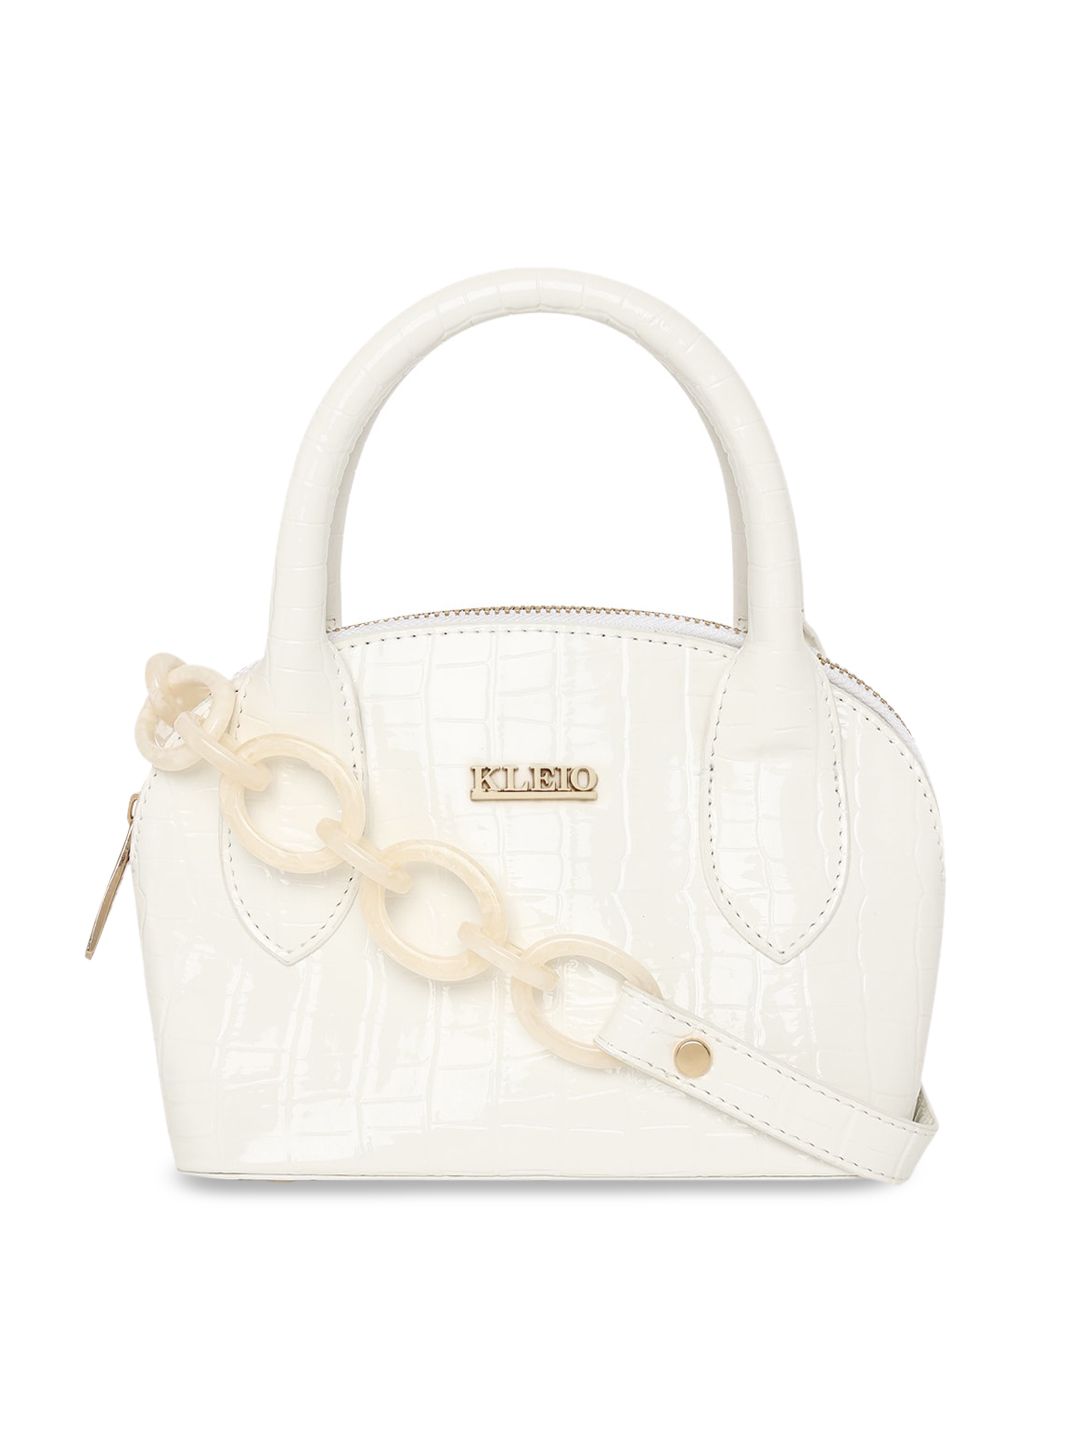 KLEIO White Croc Textured Structured Handheld Bag with Detachable Sling Strap Price in India